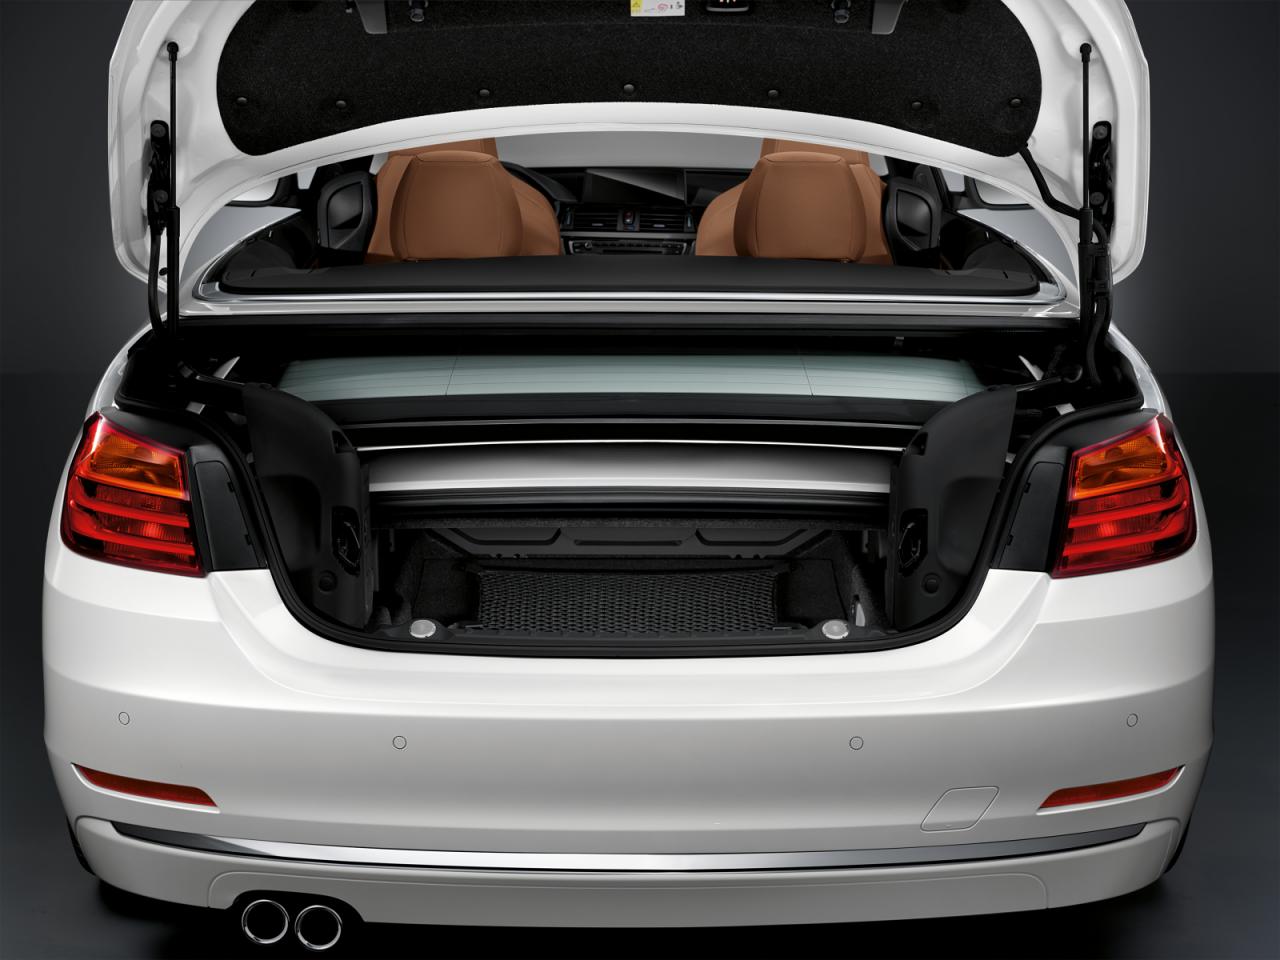 Bmw 635d convertible boot space #2